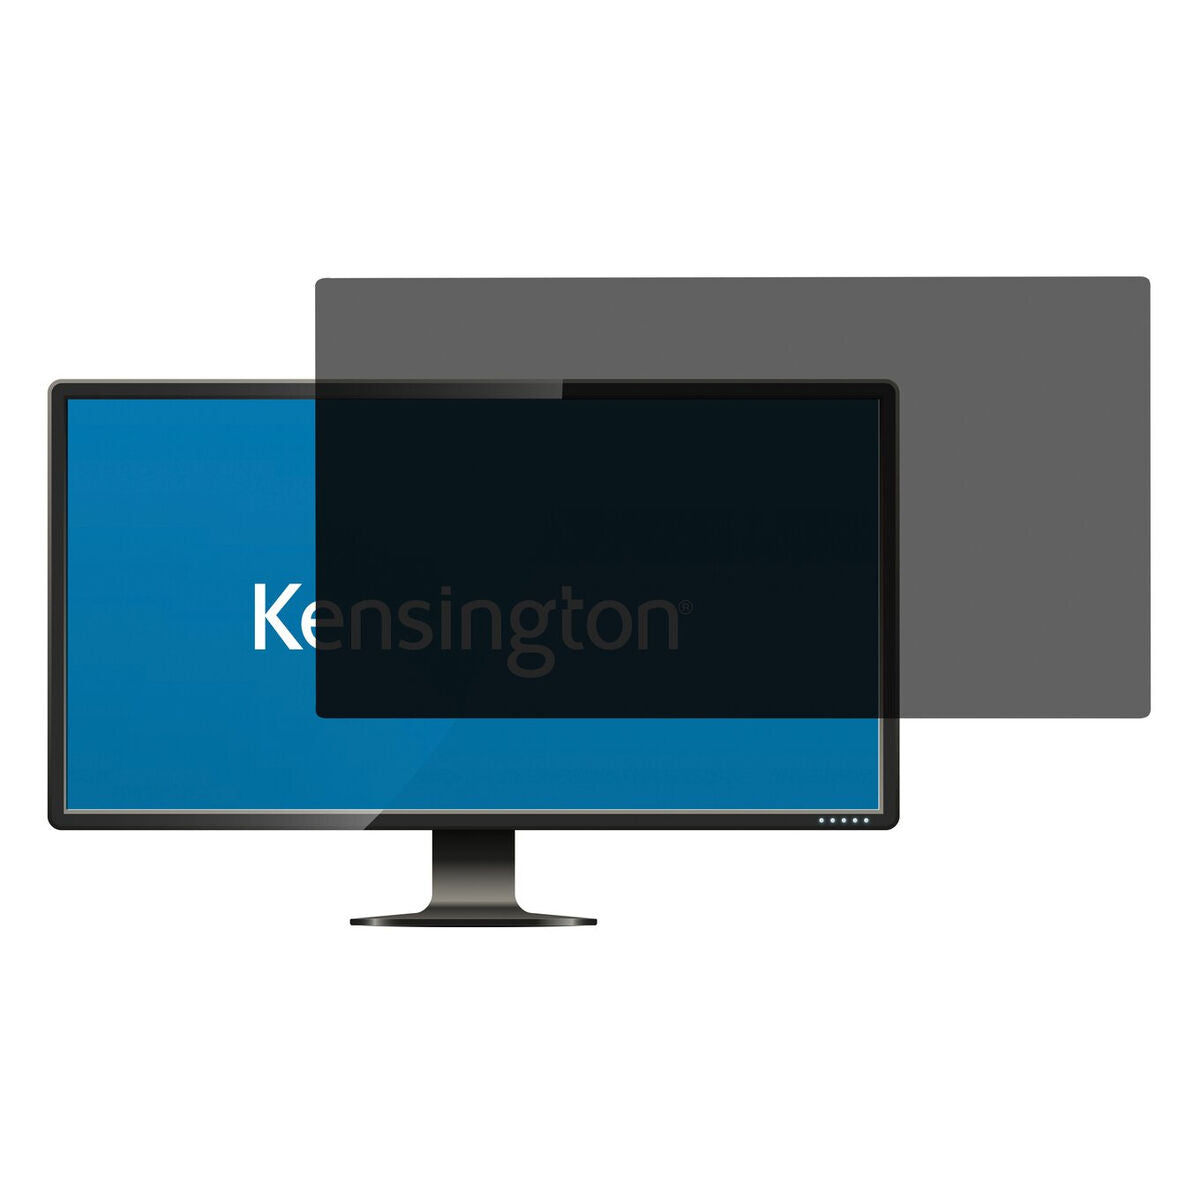 Privacy Filter for Monitor Kensington 626491 27", Kensington, Computing, Accessories, monitor-kensington-626491-27, Brand_Kensington, category-reference-2609, category-reference-2642, category-reference-2644, category-reference-t-19685, category-reference-t-19902, category-reference-t-19908, category-reference-t-21342, computers / peripherals, Condition_NEW, office, Price_100 - 200, Teleworking, RiotNook